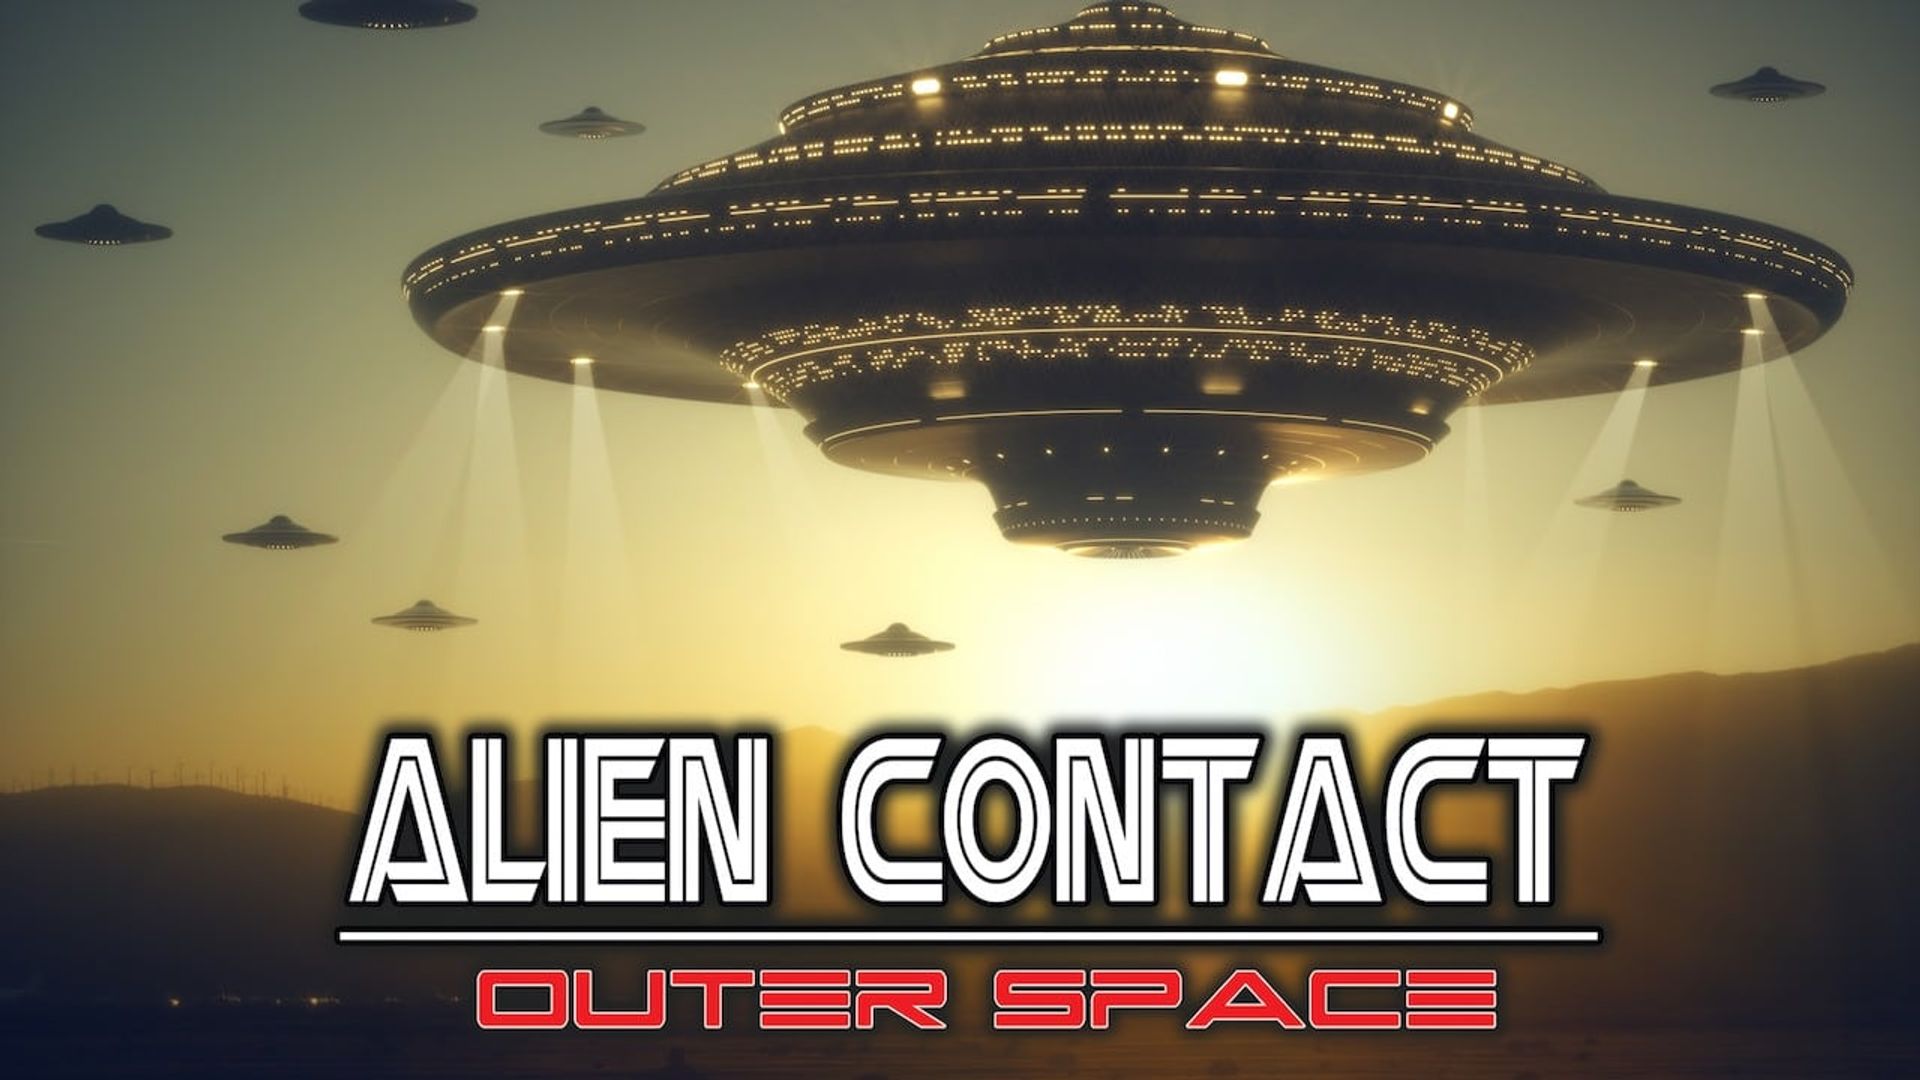 Alien Contact: Outer Space Backdrop